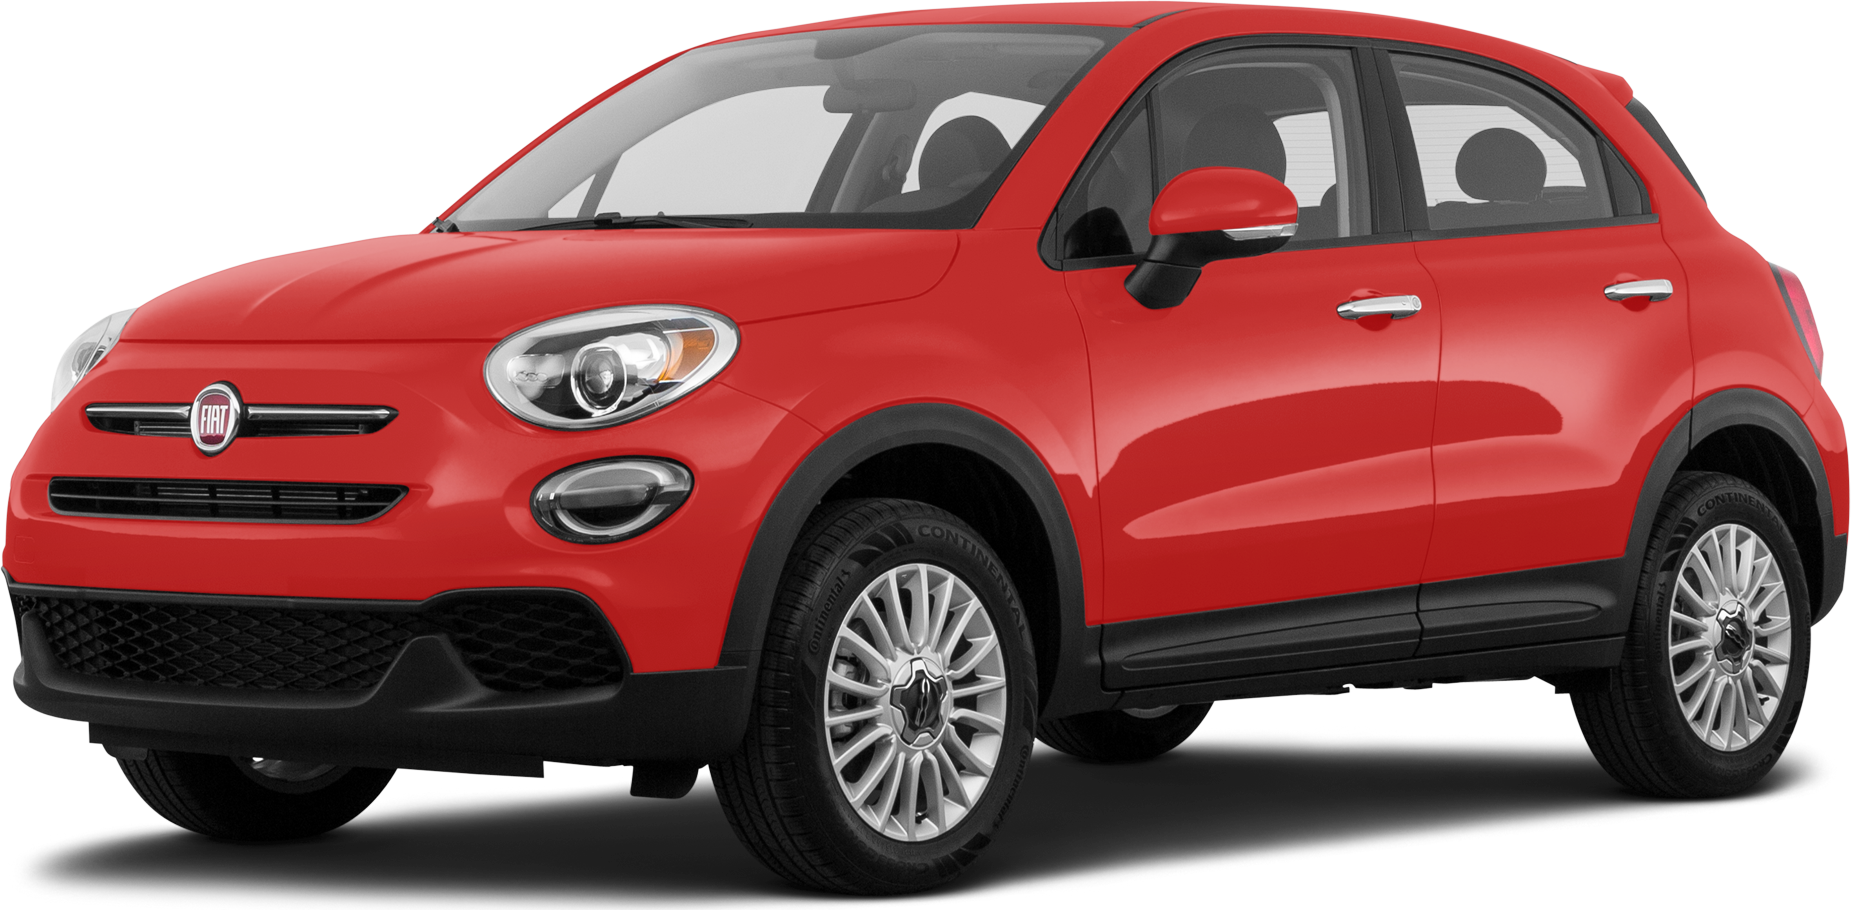 2025 Fiat 500X: Next Gen Keeps Italian Flair And Grows In Size To Compete  With Compact SUVs